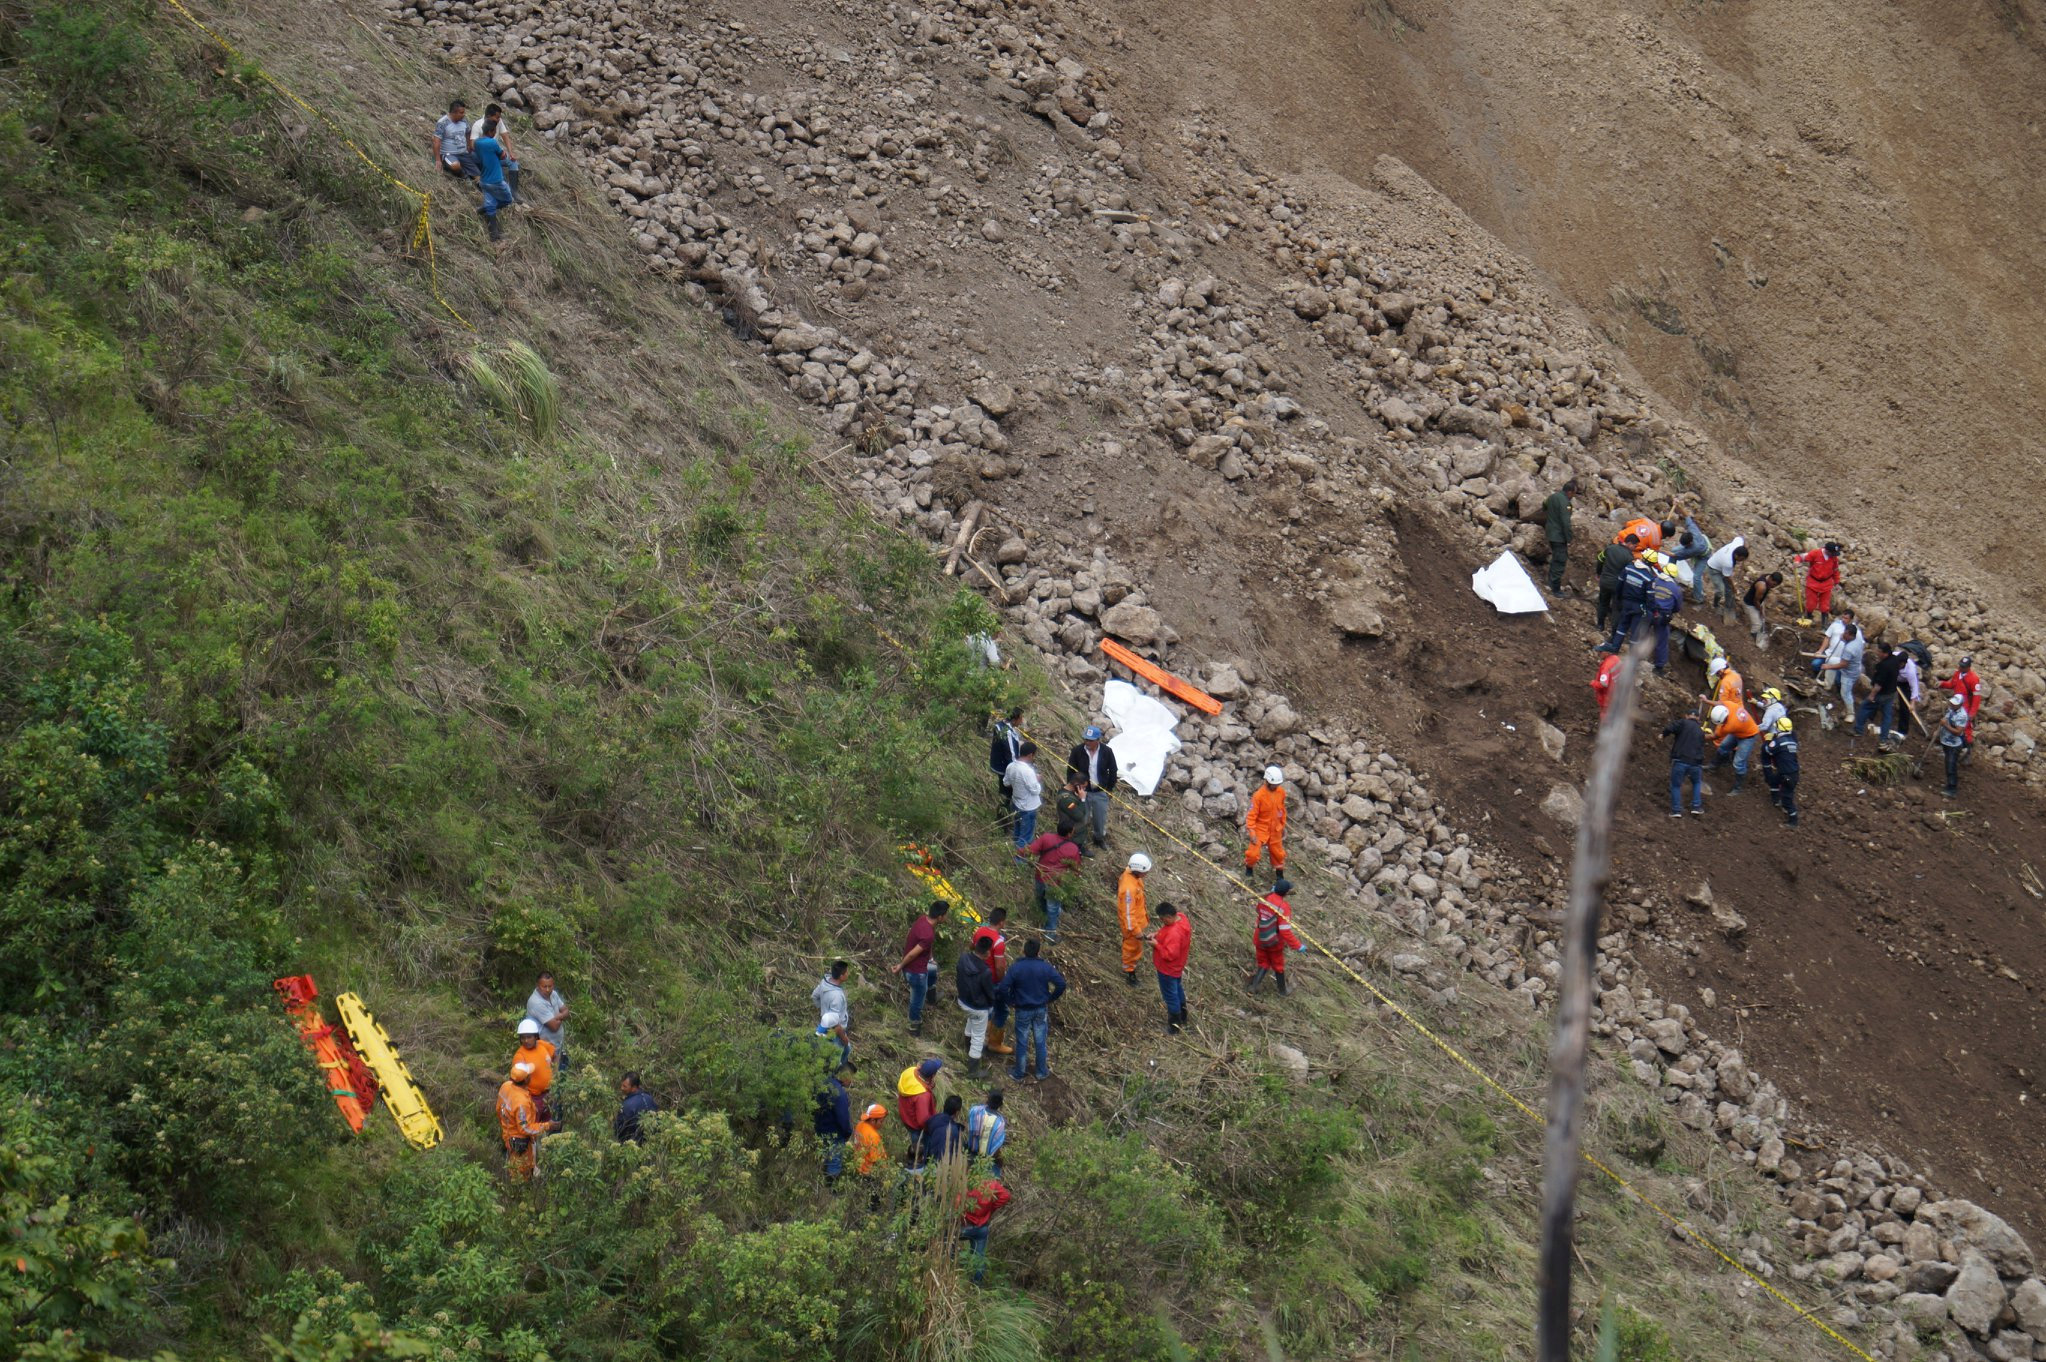 13 killed as landslide pushes bus into ravine in Colombia